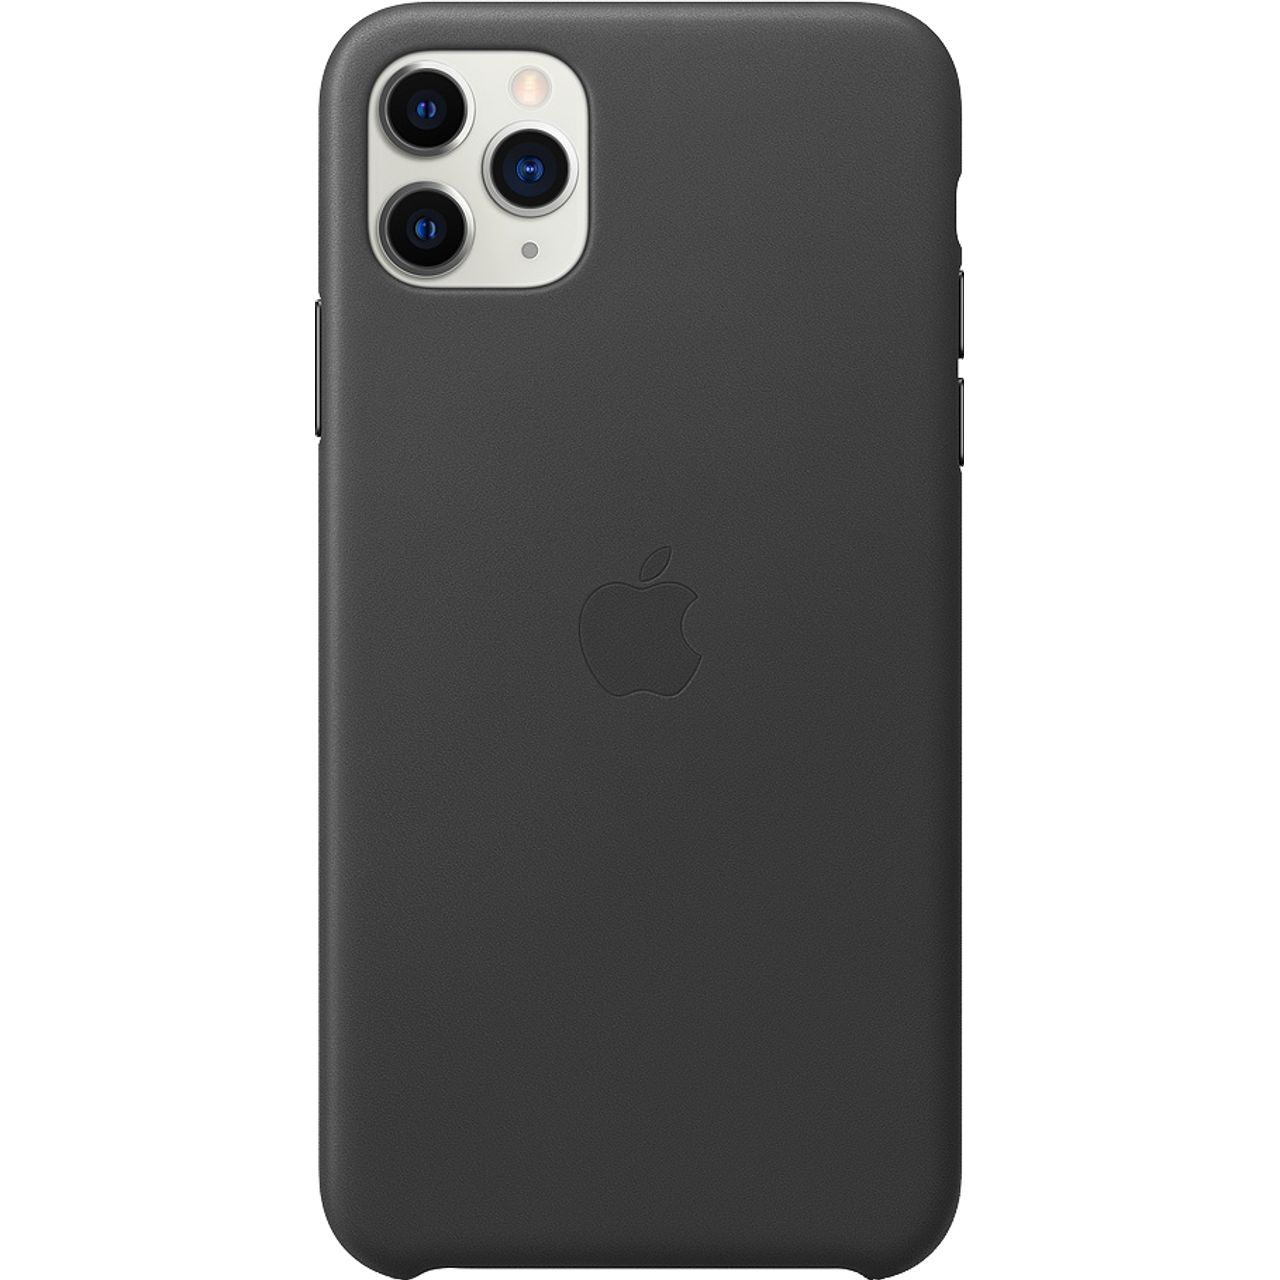 Apple iPhone 11 Pro Max Leather Case Review